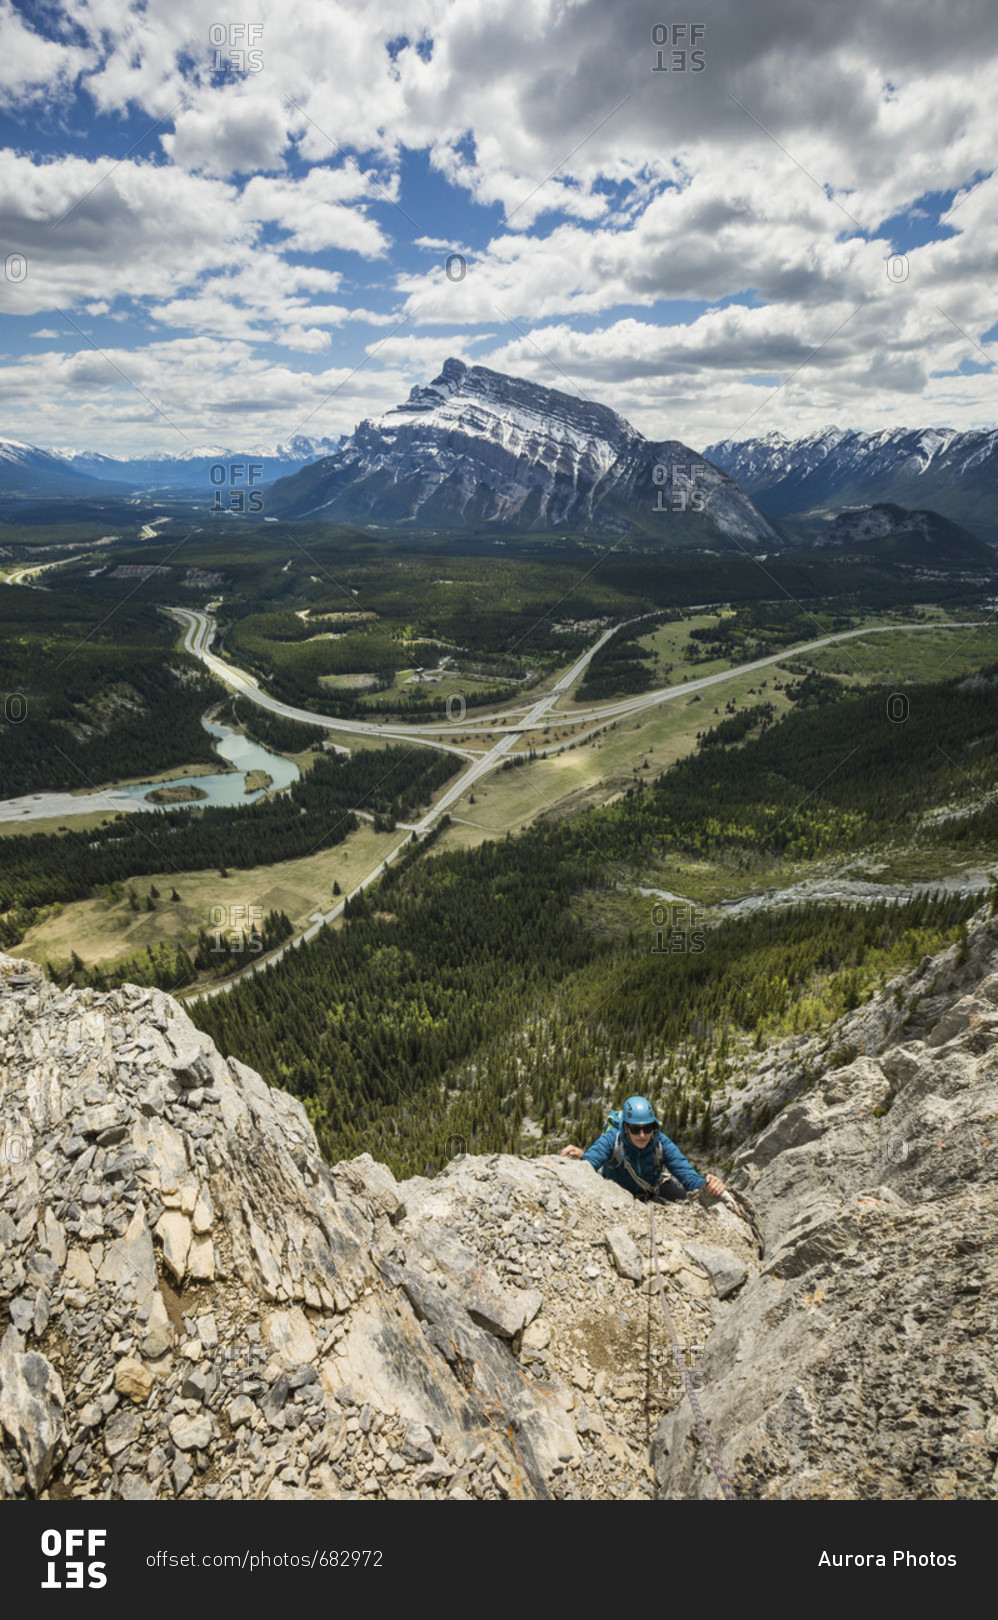 Mountain climber at Mothers Day Buttress, Banff National Park, Alberta, Canada